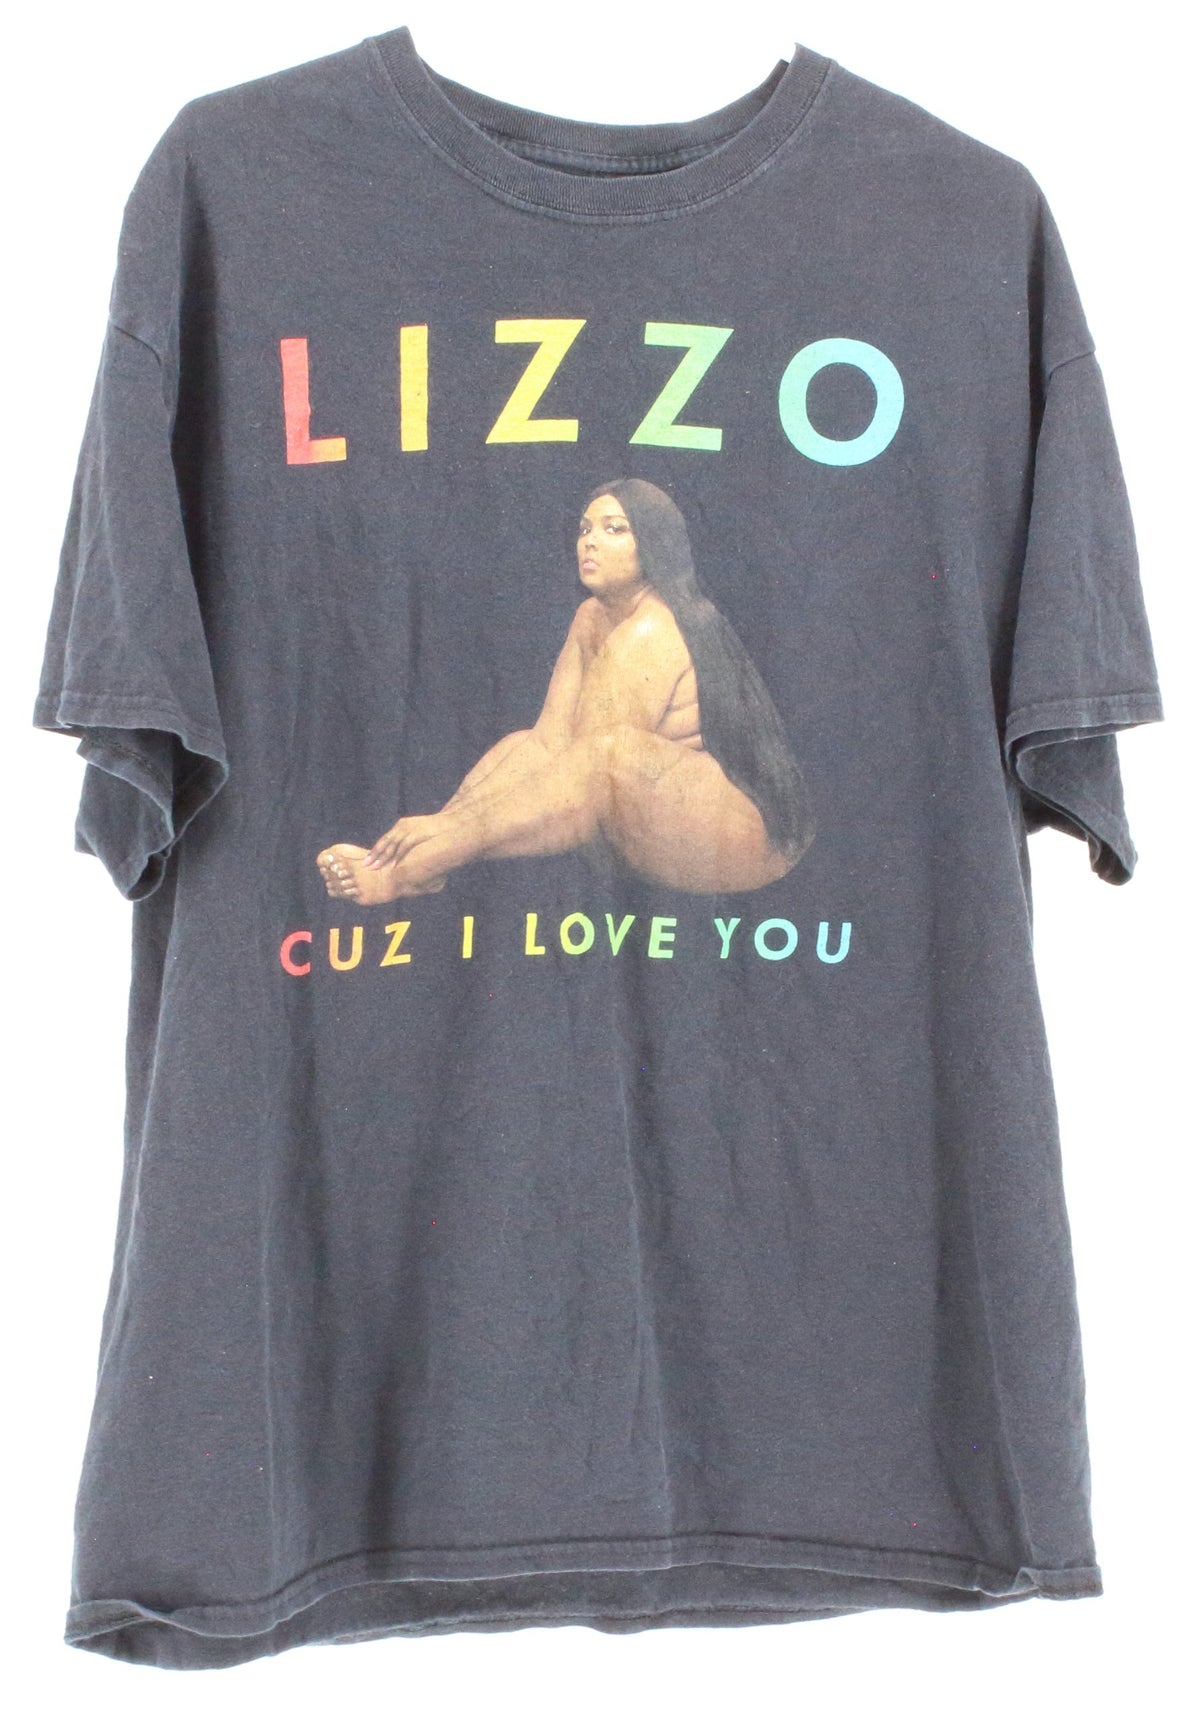 Black Lizzo "Cuz I Love You" Front Graphic T-Shirt